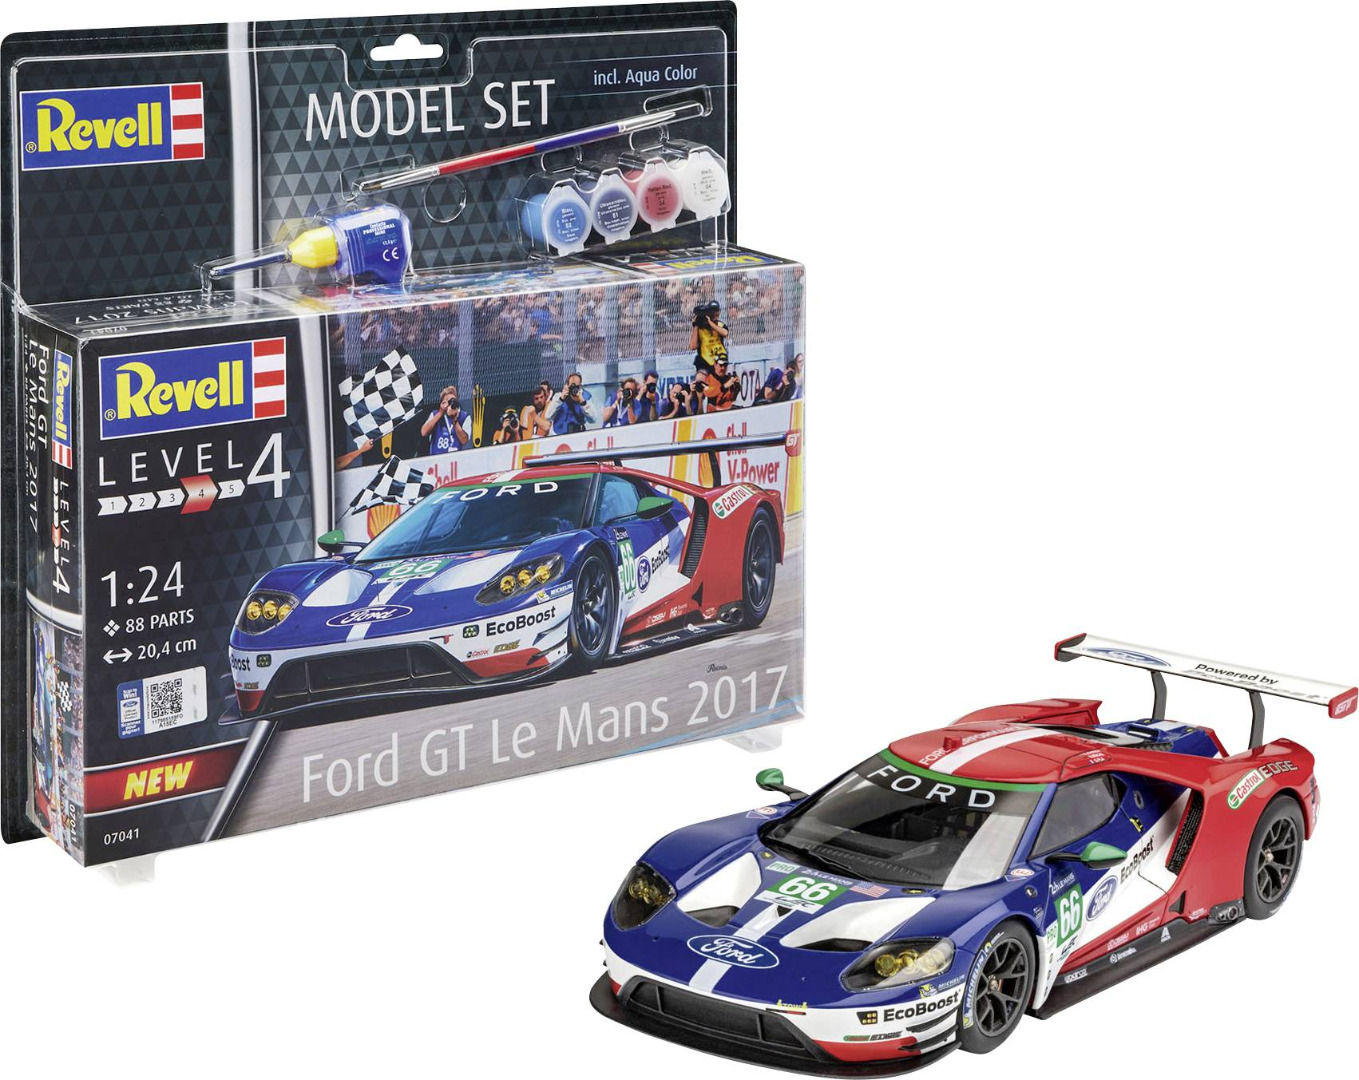 Revell Model Set Ford GT Le Mans 2017 Scale 1:24